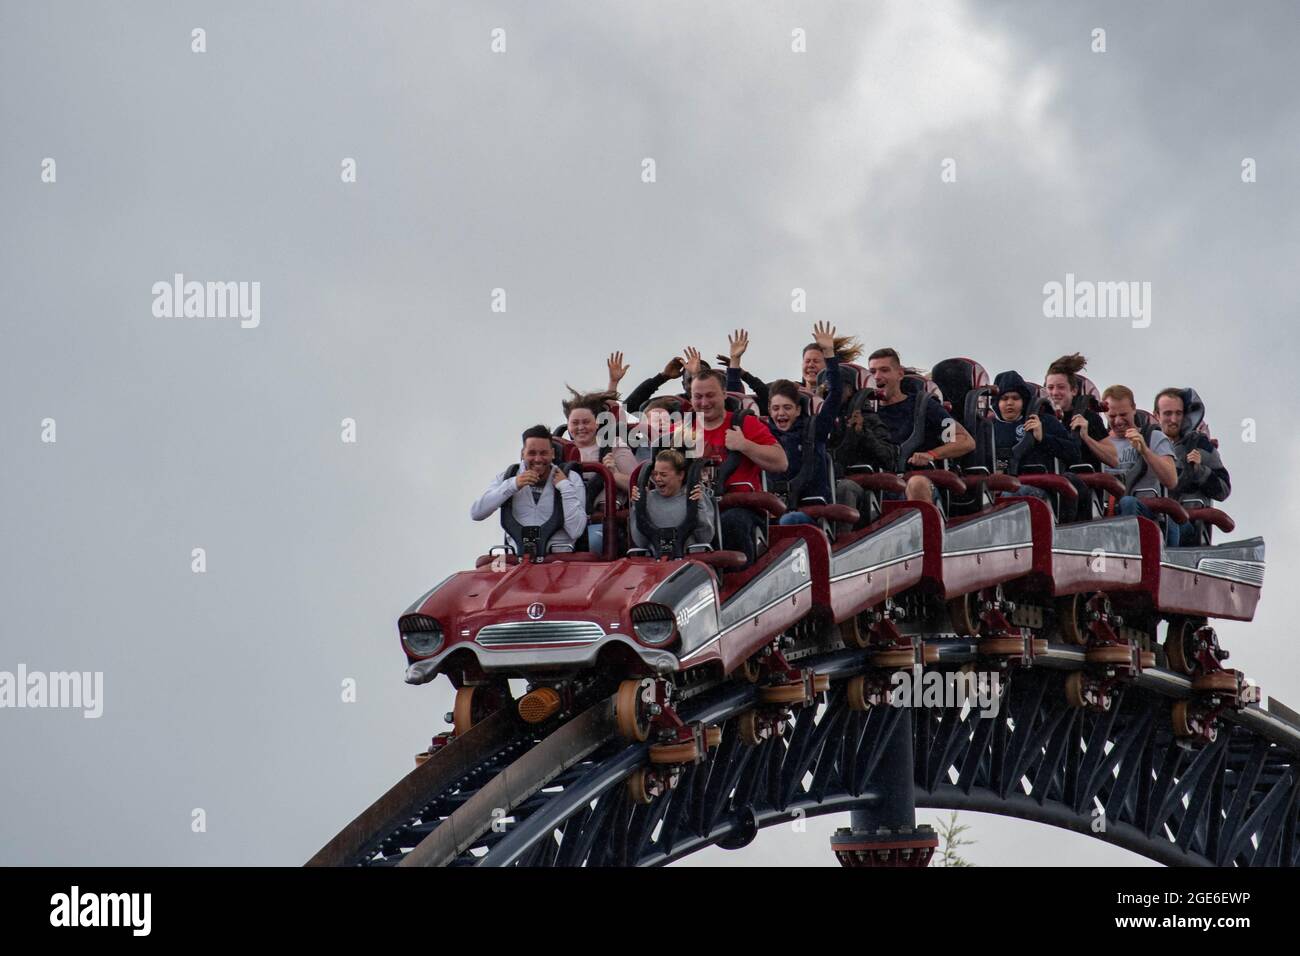 Stealth Launched Rollercoaster Fastest In The Uk 5 Foot Tall At Thorpe Park Theme Park London England Stock Photo Alamy